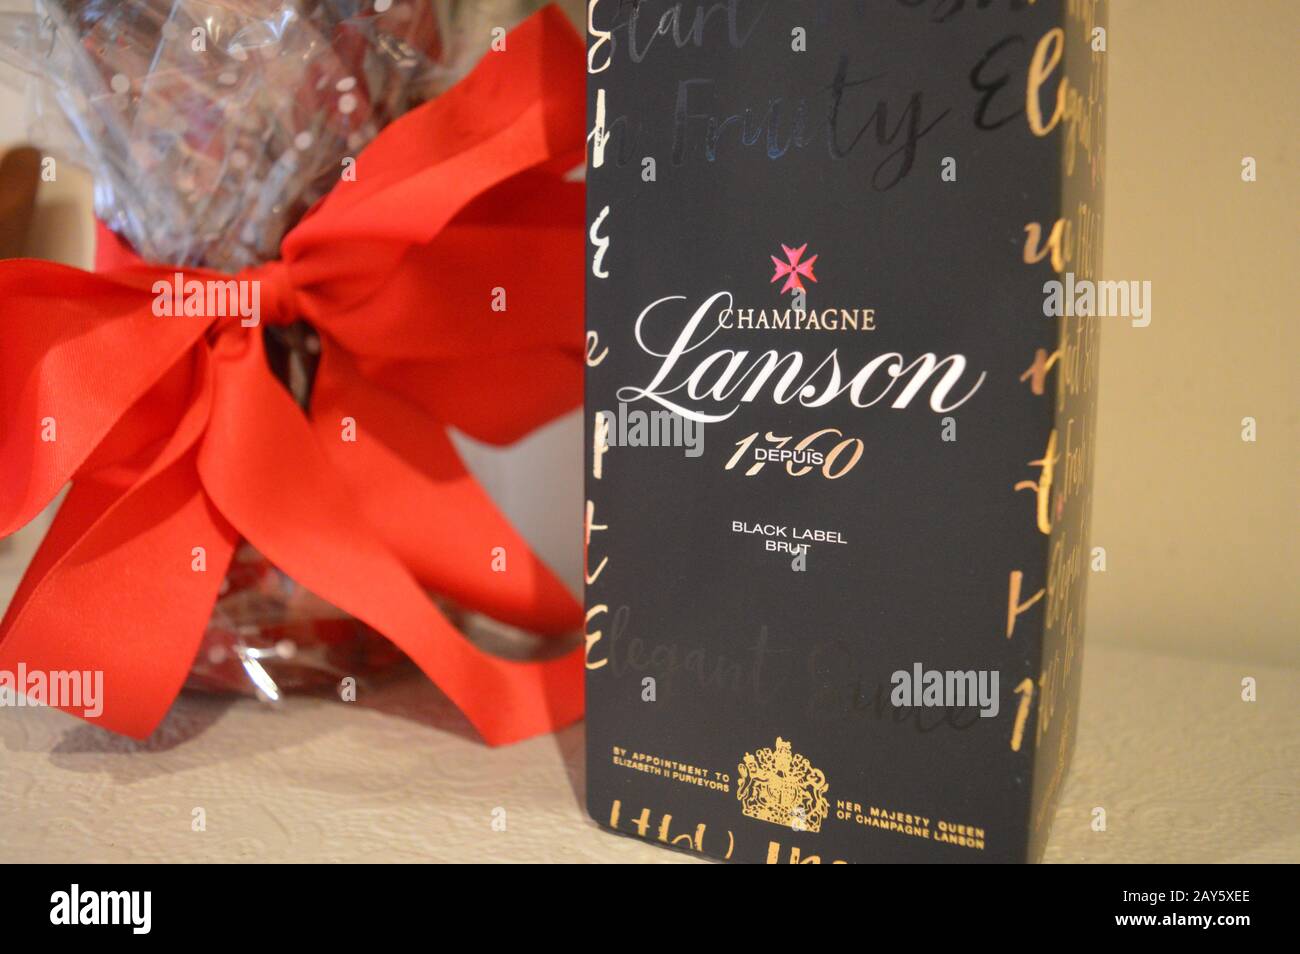 Lanson Champagne and Bouquet Stock Photo